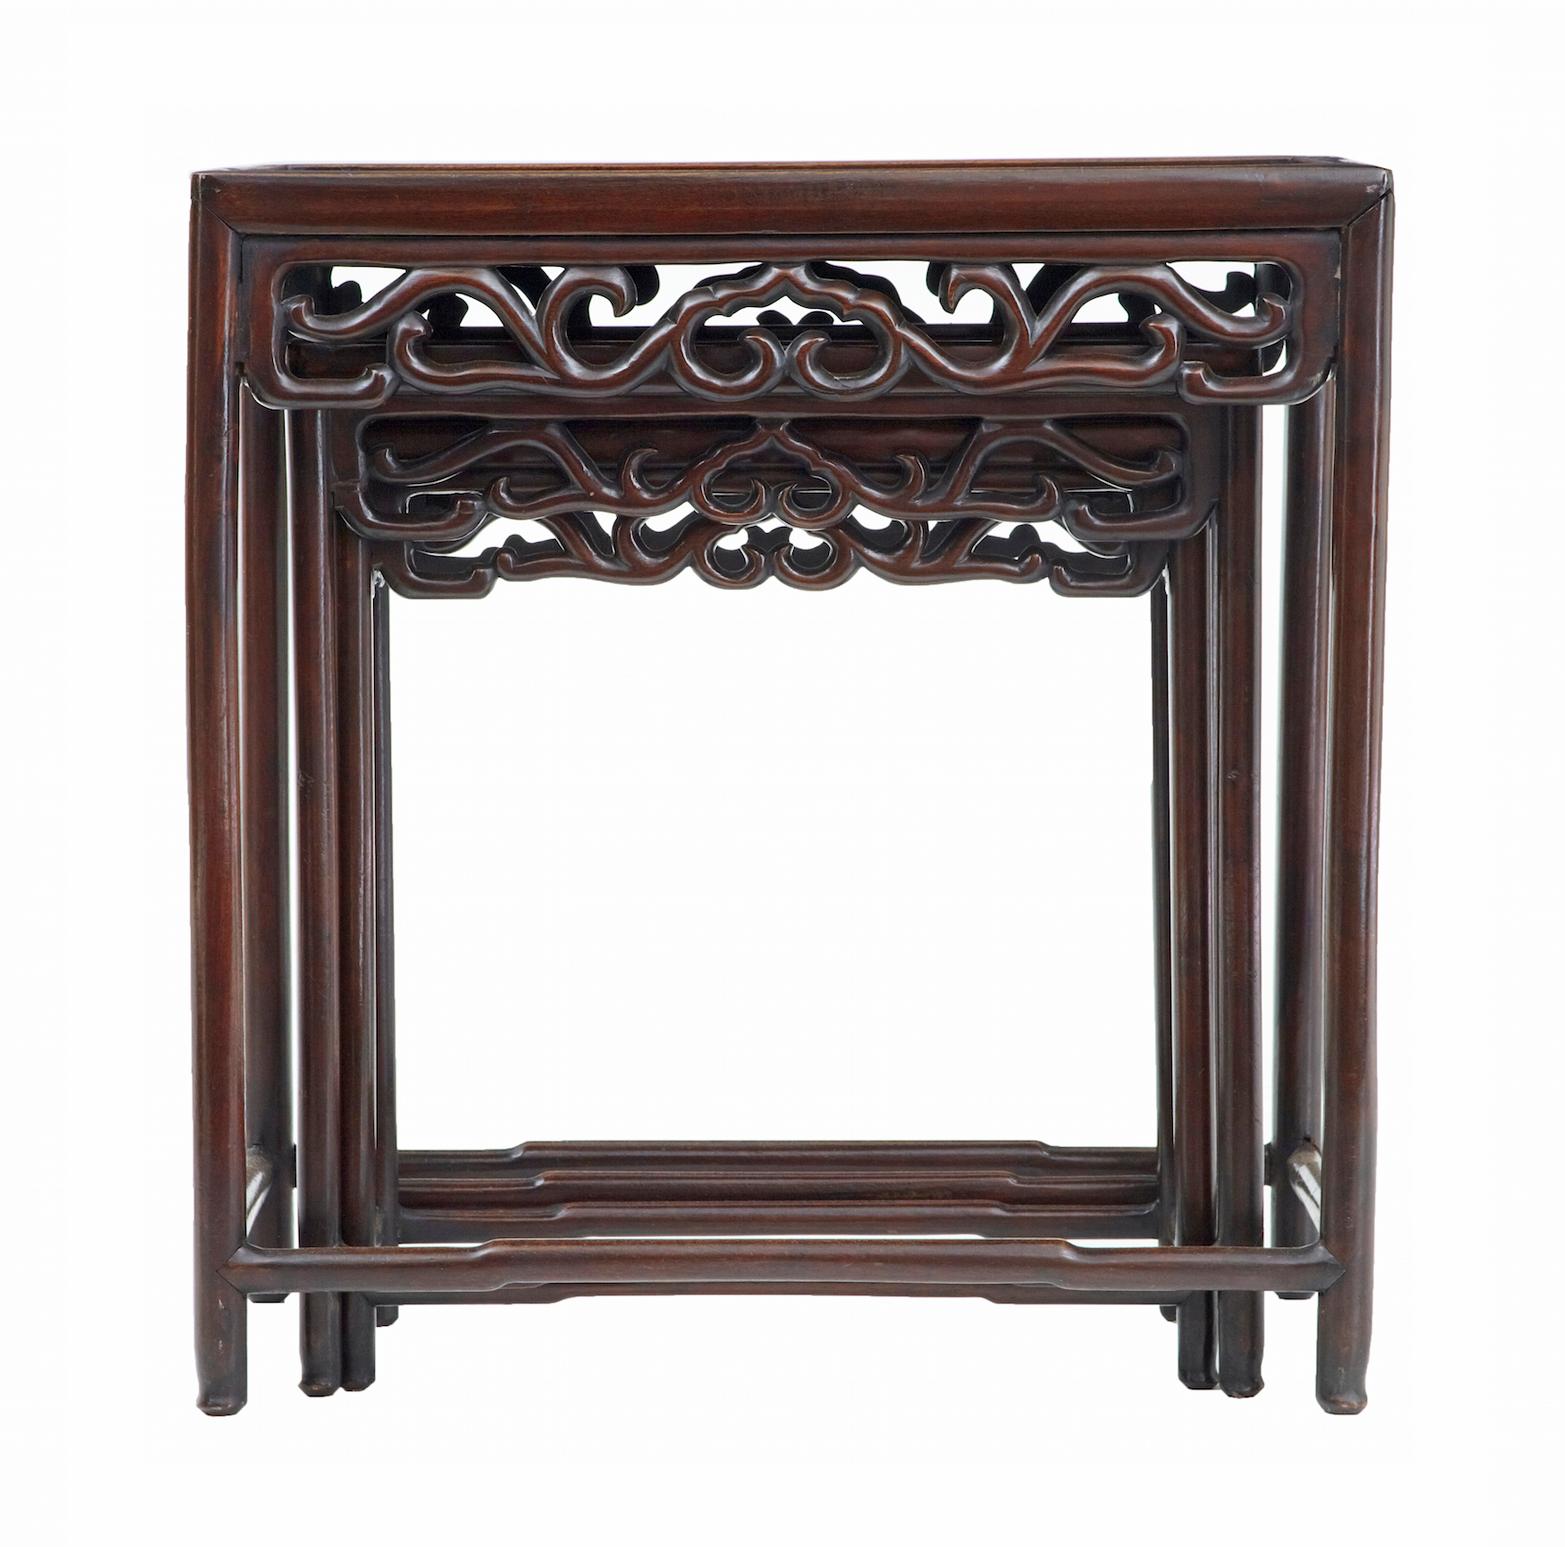 Good quality set of 3 Chinese tables, circa 1890. Formerly a nest of 4. Good color and patina, similar to rosewood. Nest forms by stacking as opposed to pulling out, ideal for making a set of occasional tables around the home.

Measures: Largest